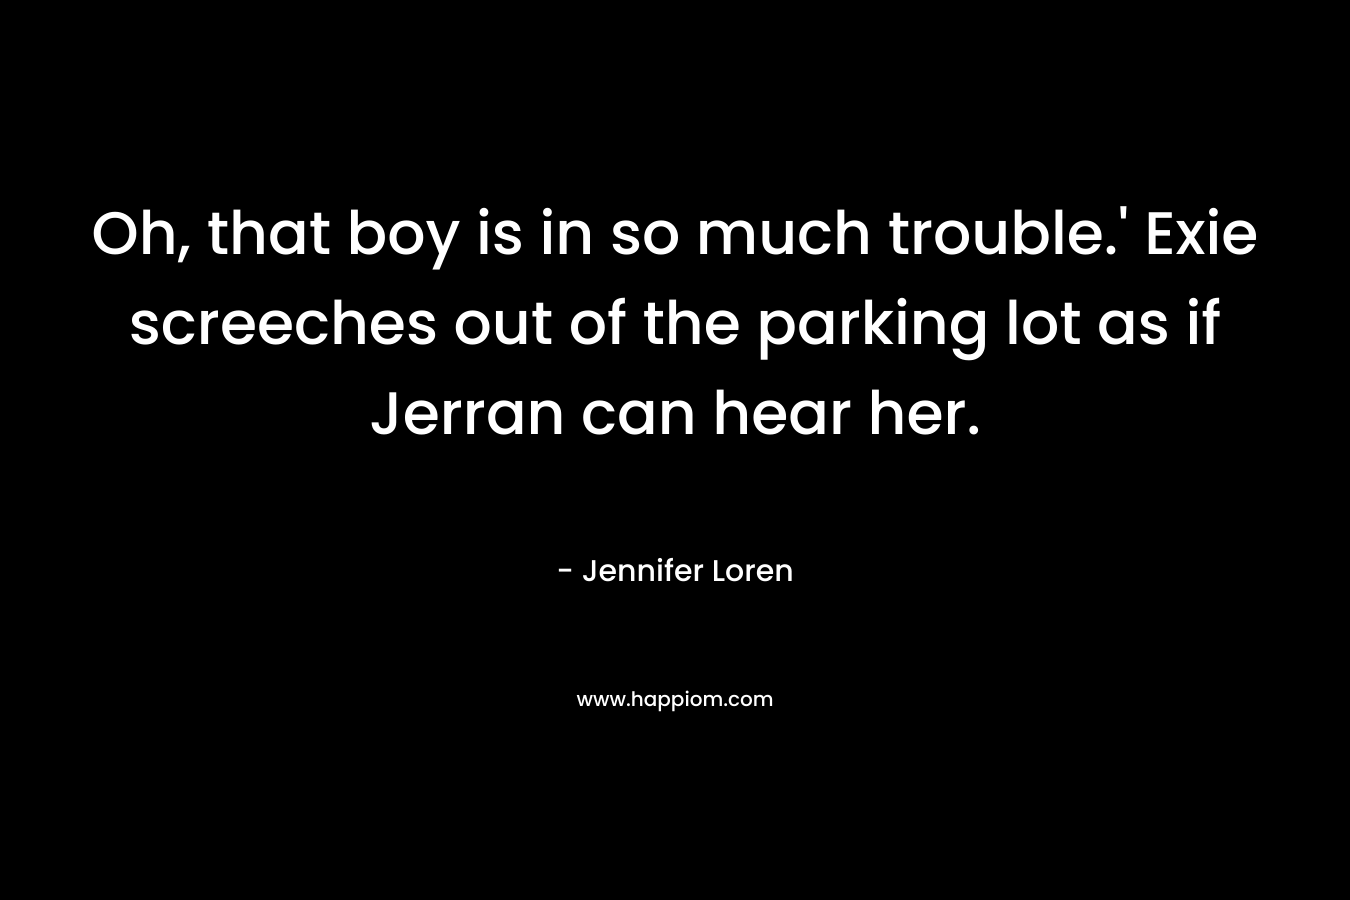 Oh, that boy is in so much trouble.’ Exie screeches out of the parking lot as if Jerran can hear her. – Jennifer Loren